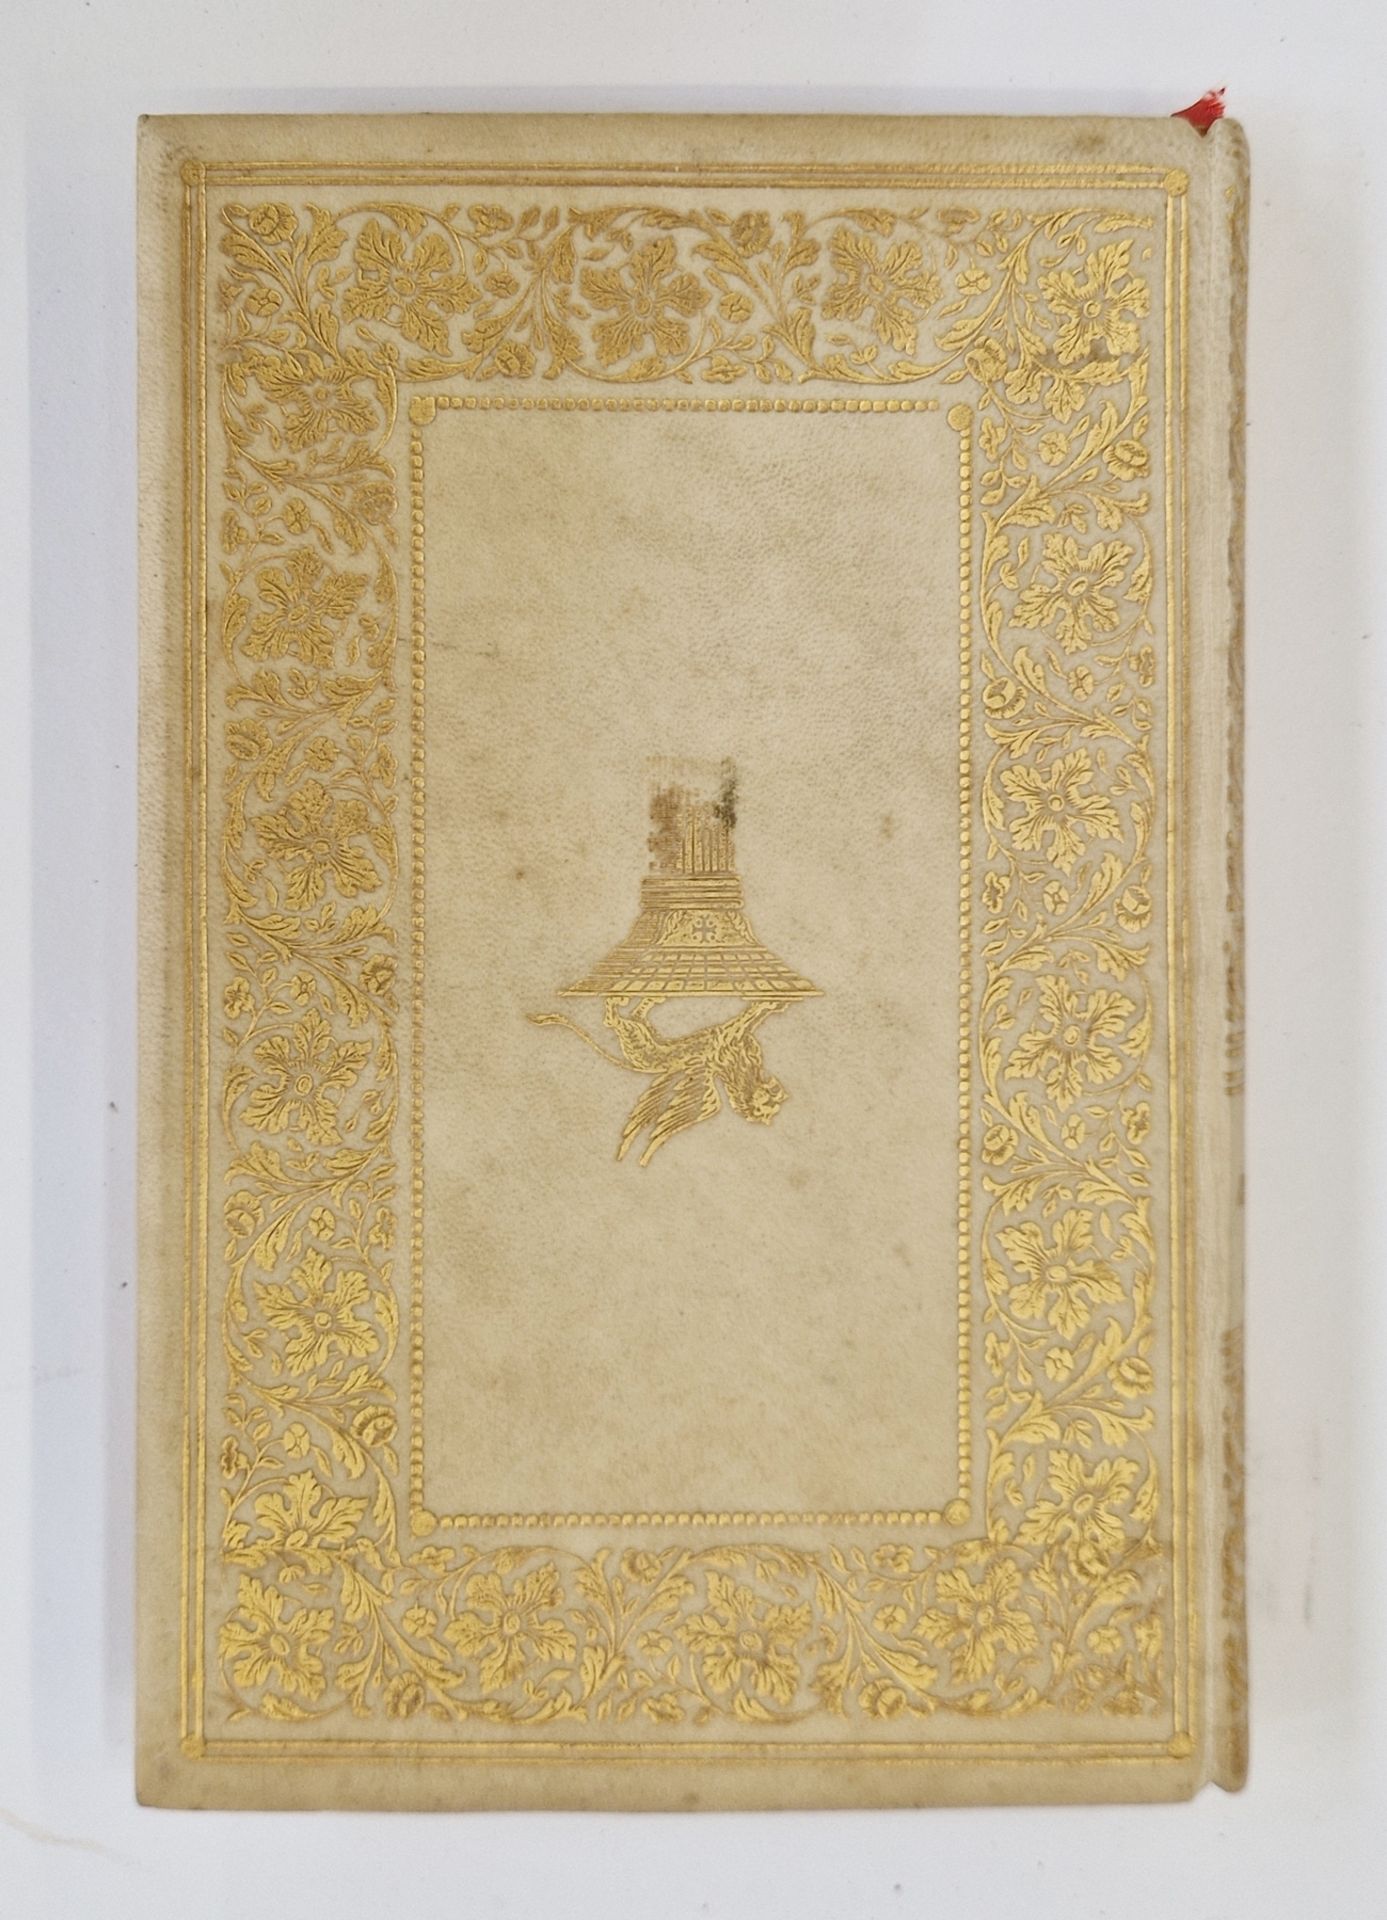 Bindings - Ruskin, John "Selections form the Writings of John Ruskin, First Series 1843-1860" Second - Image 2 of 7